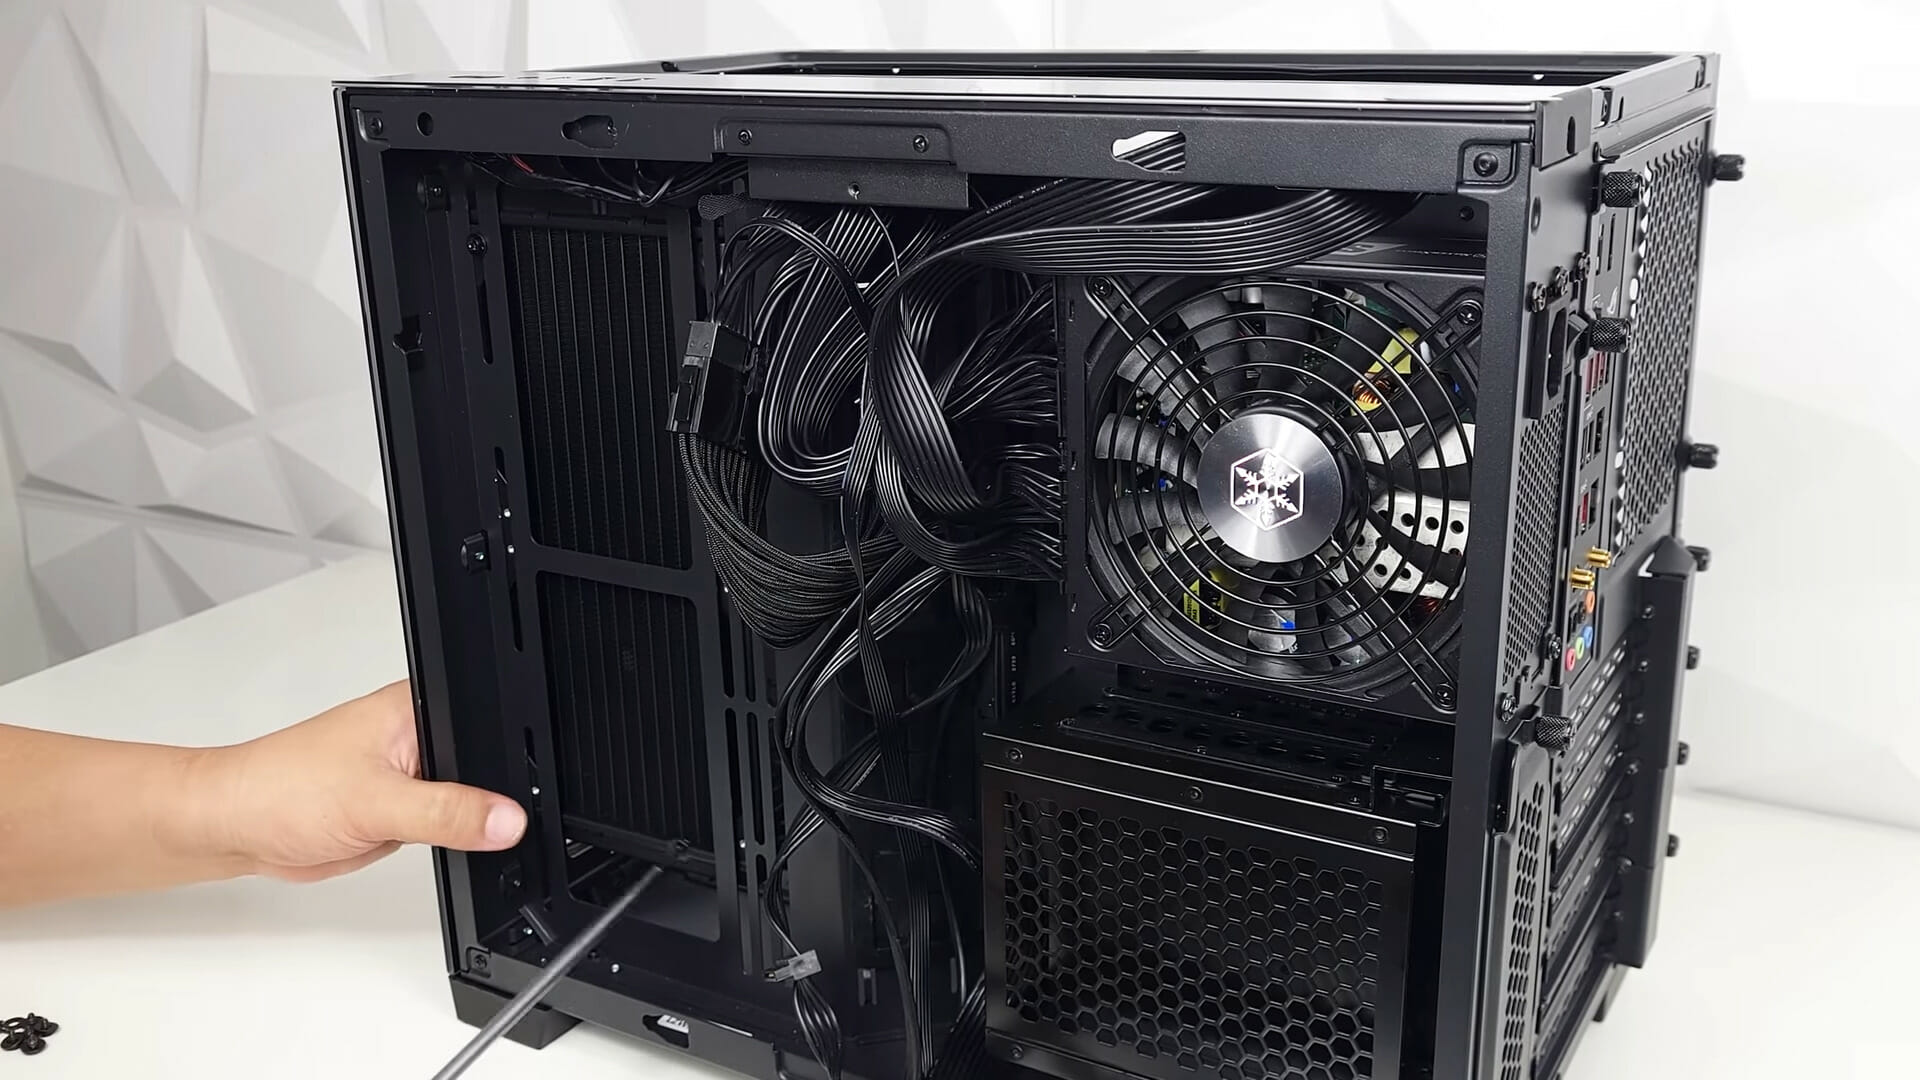 How to build a PC: a step-by-step guide to getting the job done